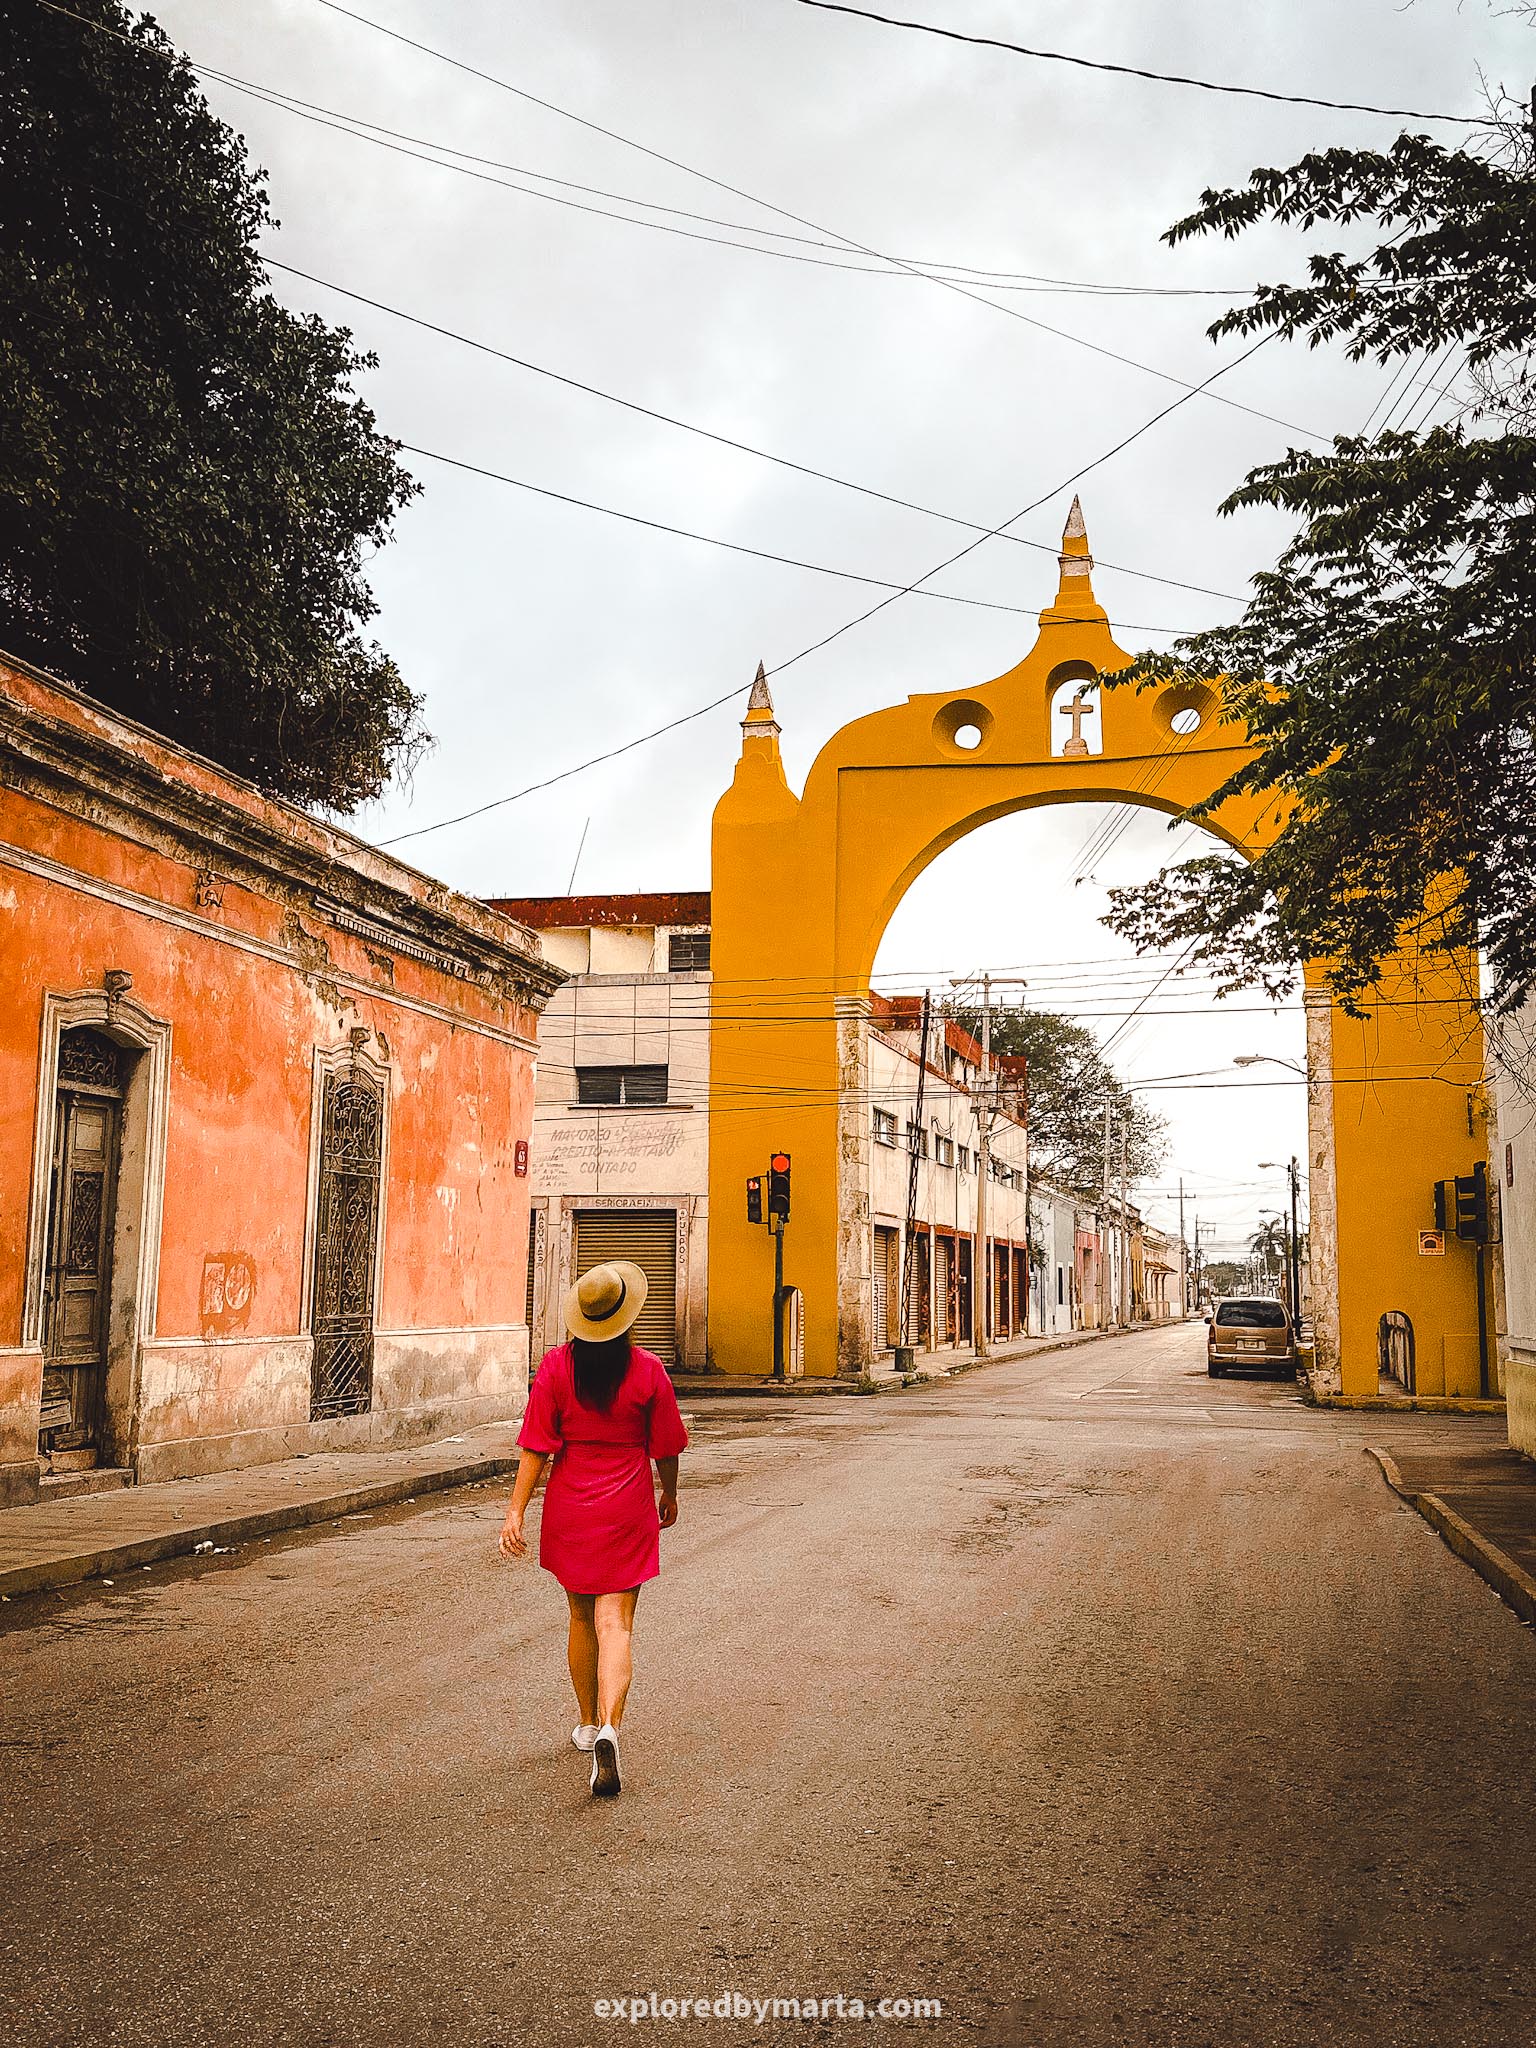 Merida, Mexico-Arco del Puente yellow arch stretching over a street in Merida, Mexico